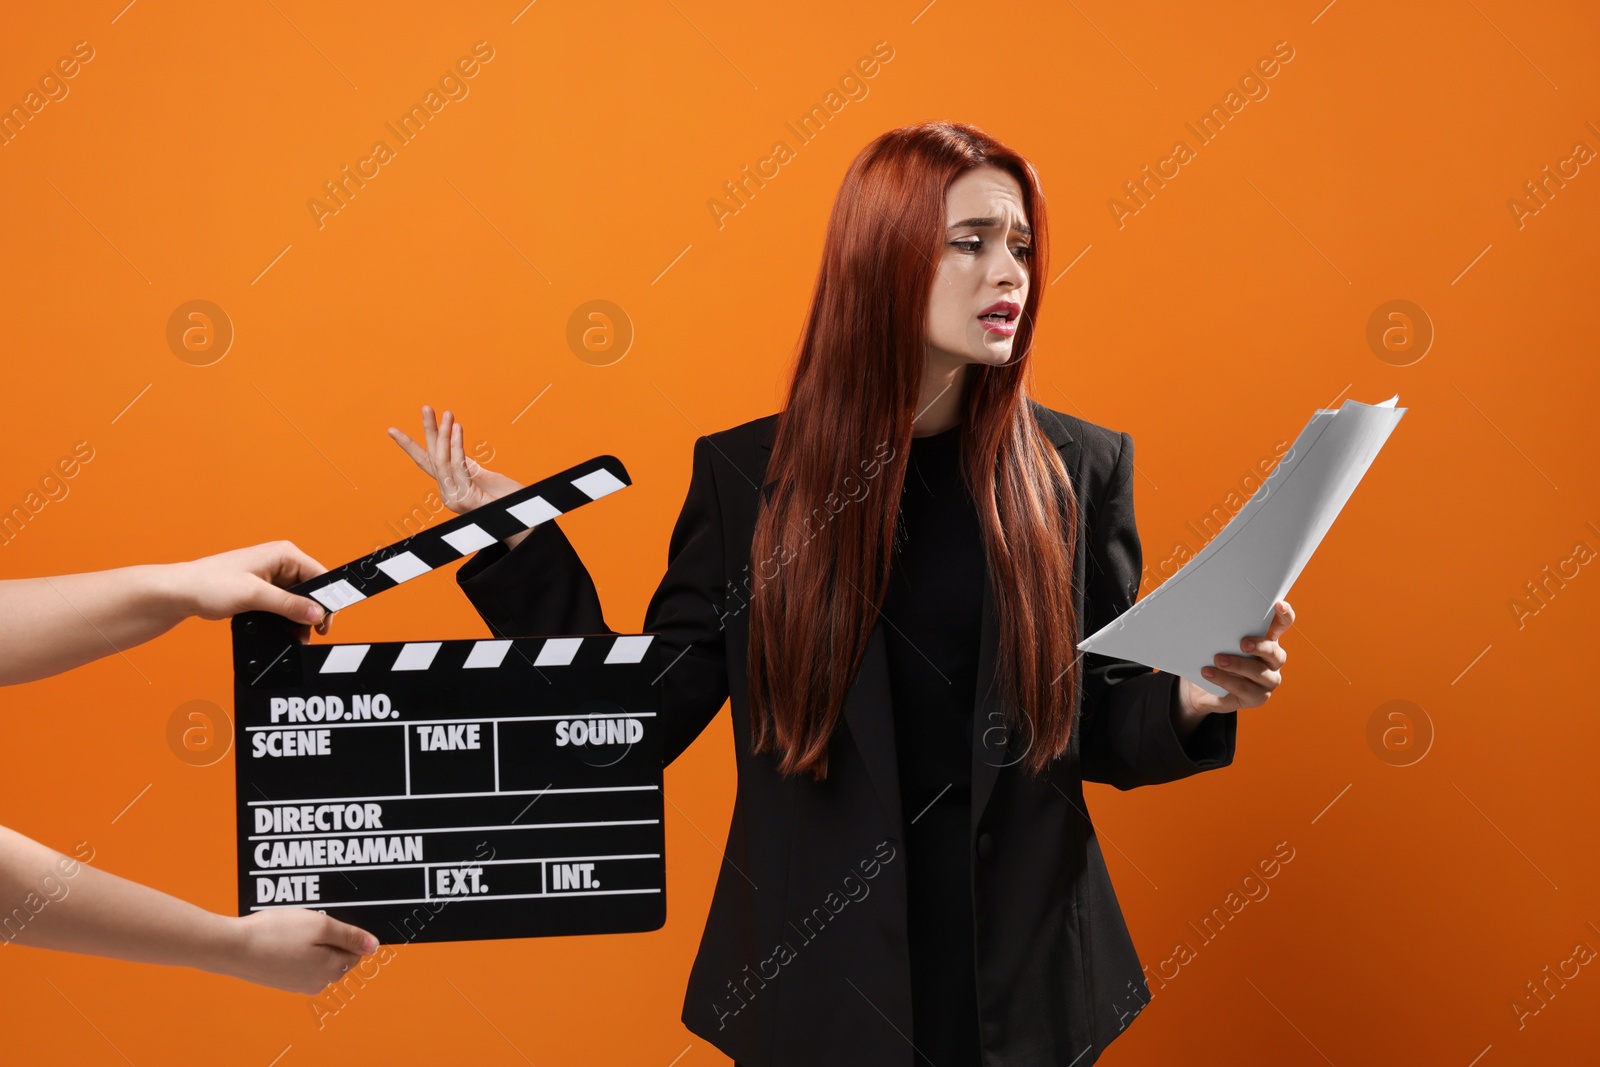 Photo of Actress performing role while second assistant camera holding clapperboard on orange background